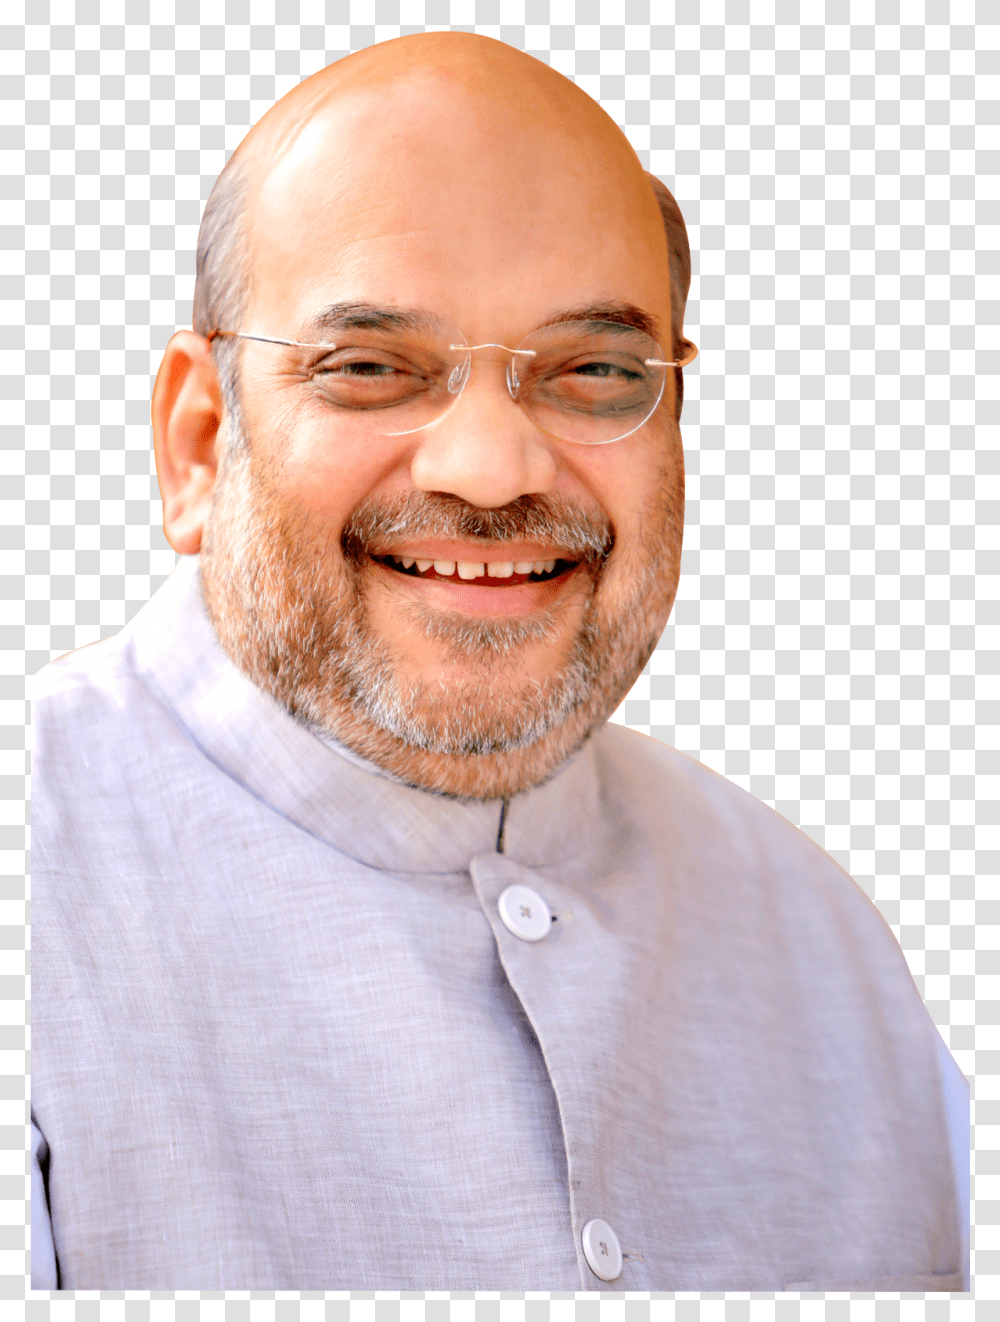 Amit Shah Hd Images Free Download Amit Shah Close Up, Face, Person, Glasses, Man Transparent Png